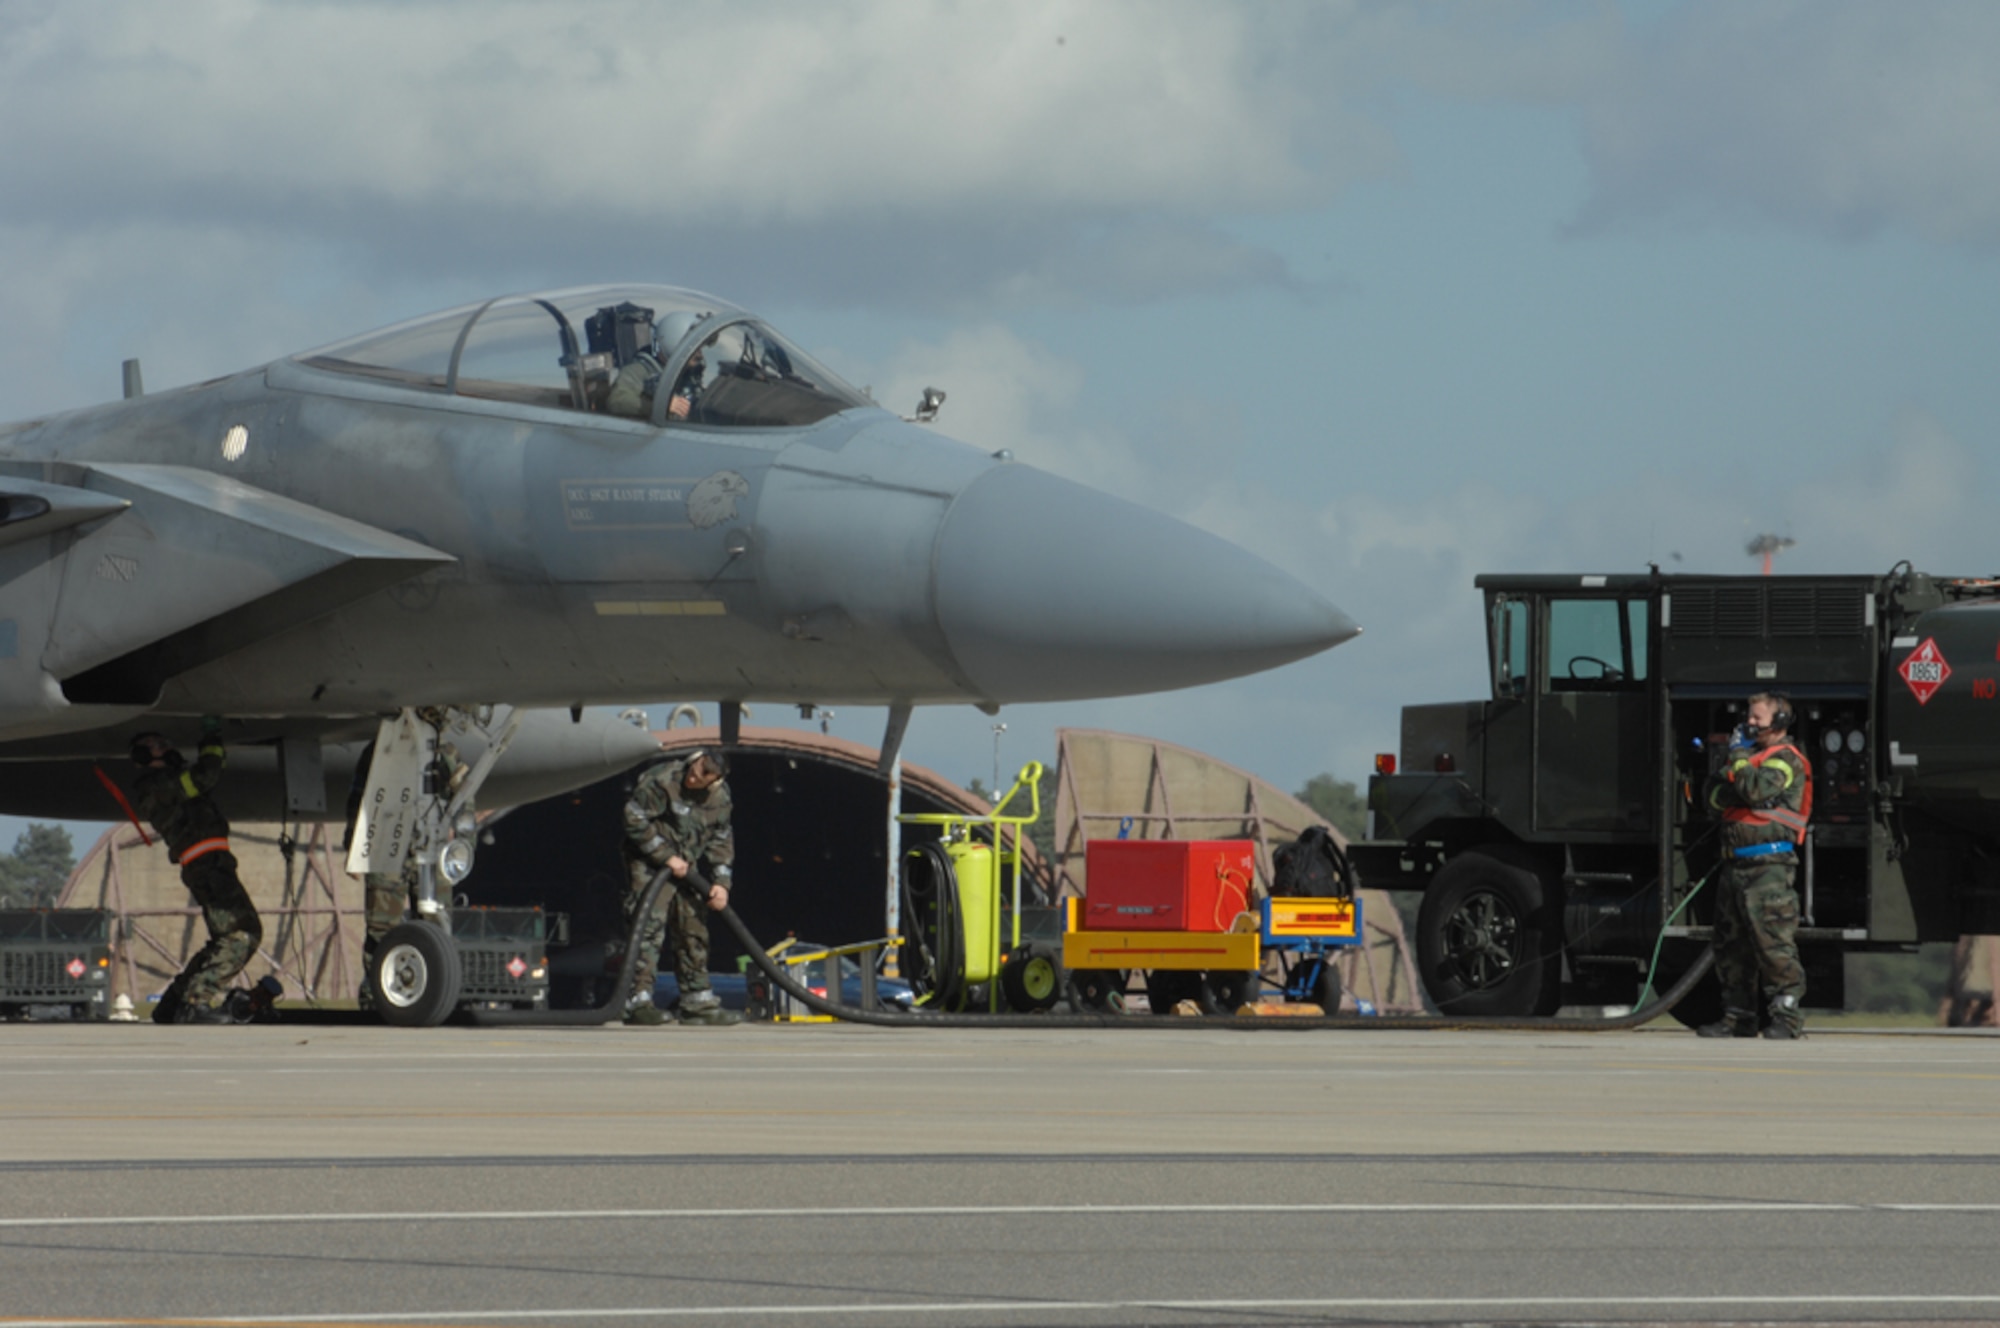 U.S. Air Force Airmen from the 48th Logistics Readiness Squadron, Petroleum Oils and Lubricants flight perform a hot pit refueling on an F-15C Eagle during a Phase 2 exercise here March 6. (US Air Force photo by Airman John Easterling)